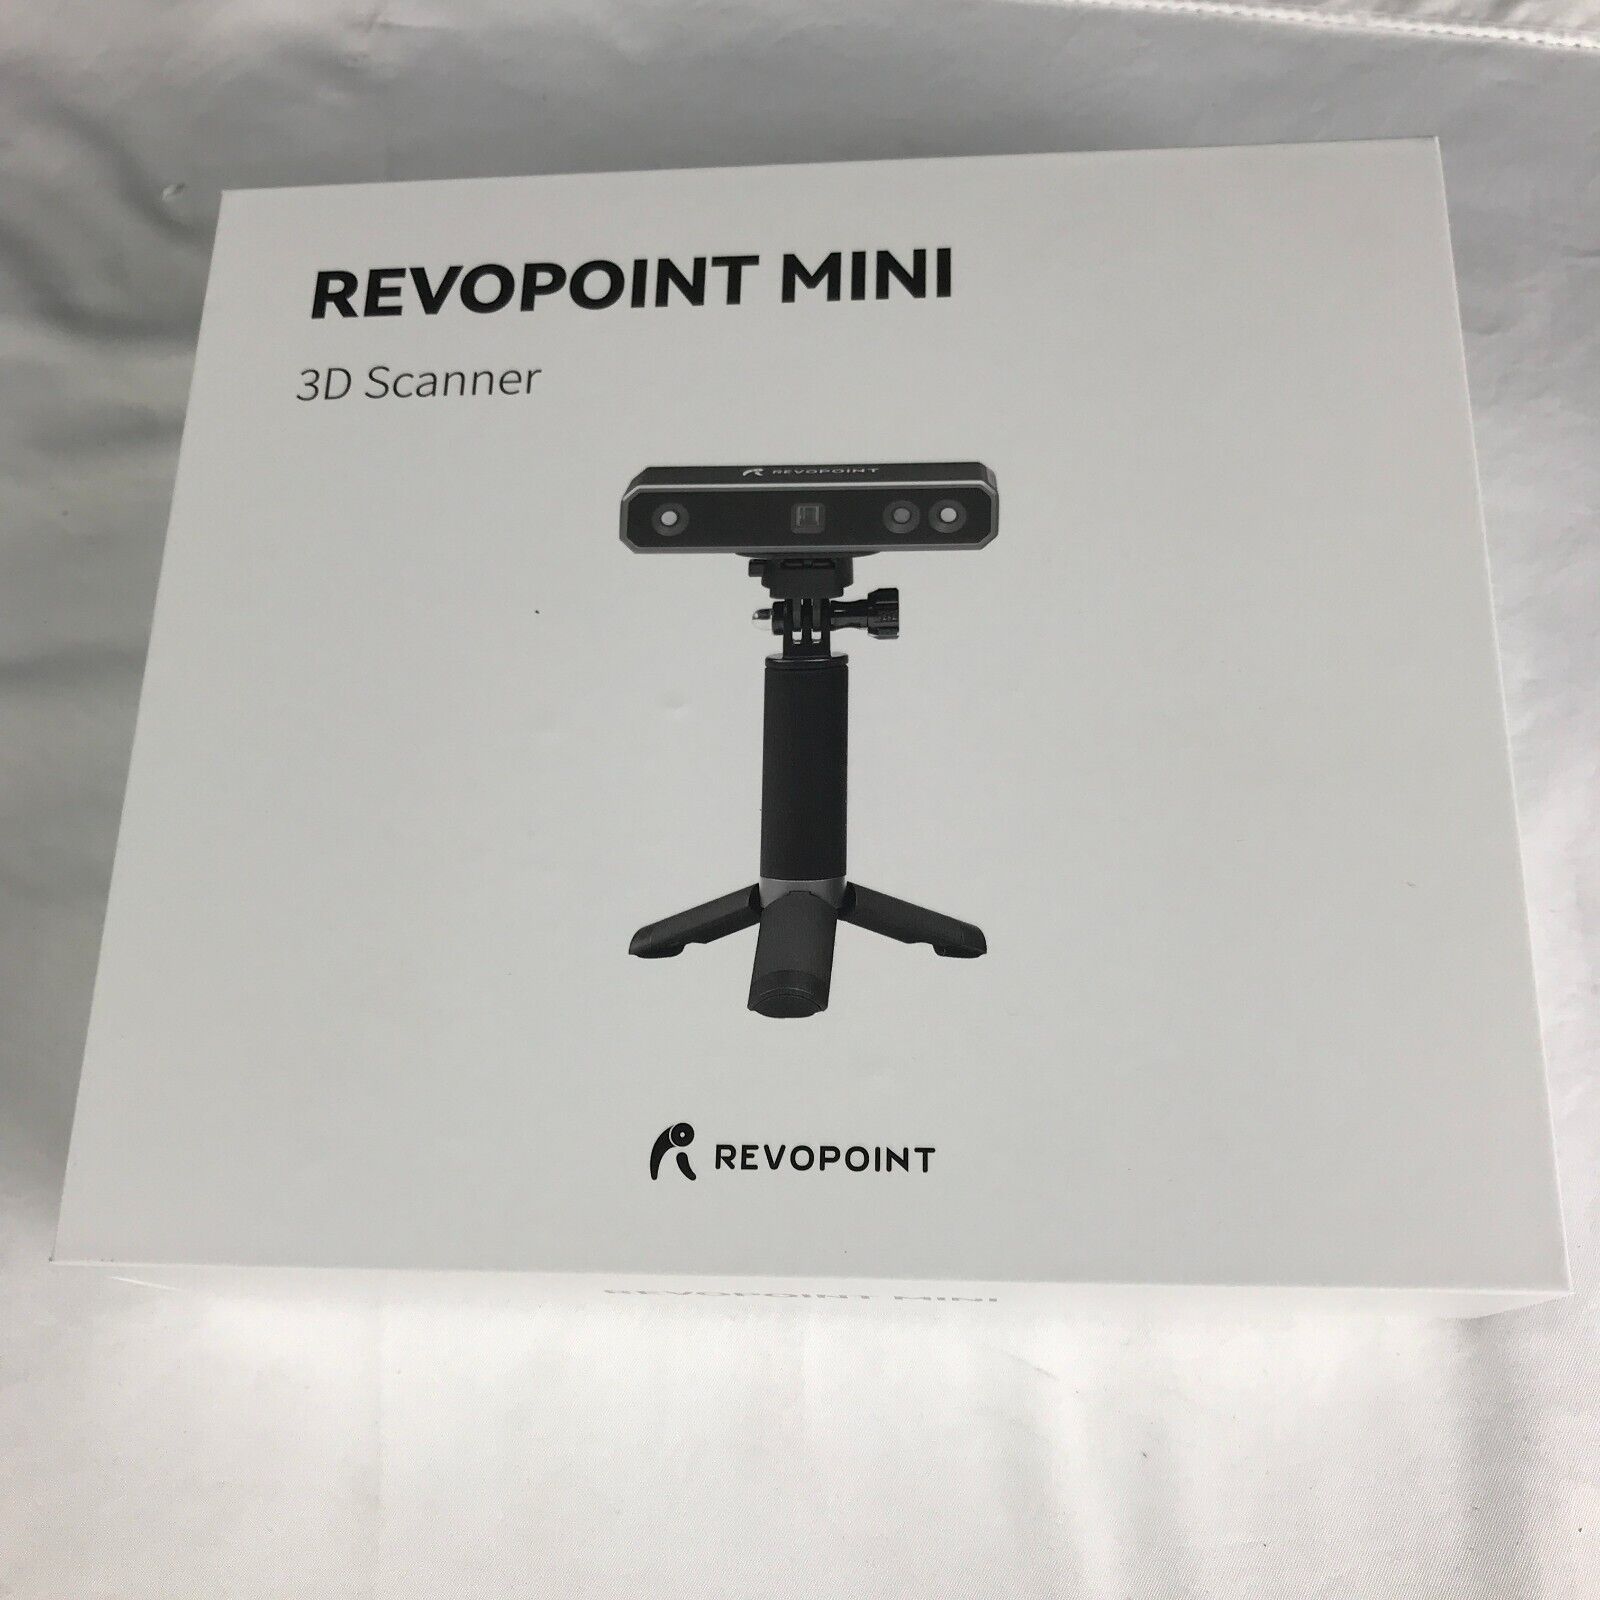 Revopoint MINI 3D Scanner 0.02 mm Precision 10 Fps Scan Speed - Open Box